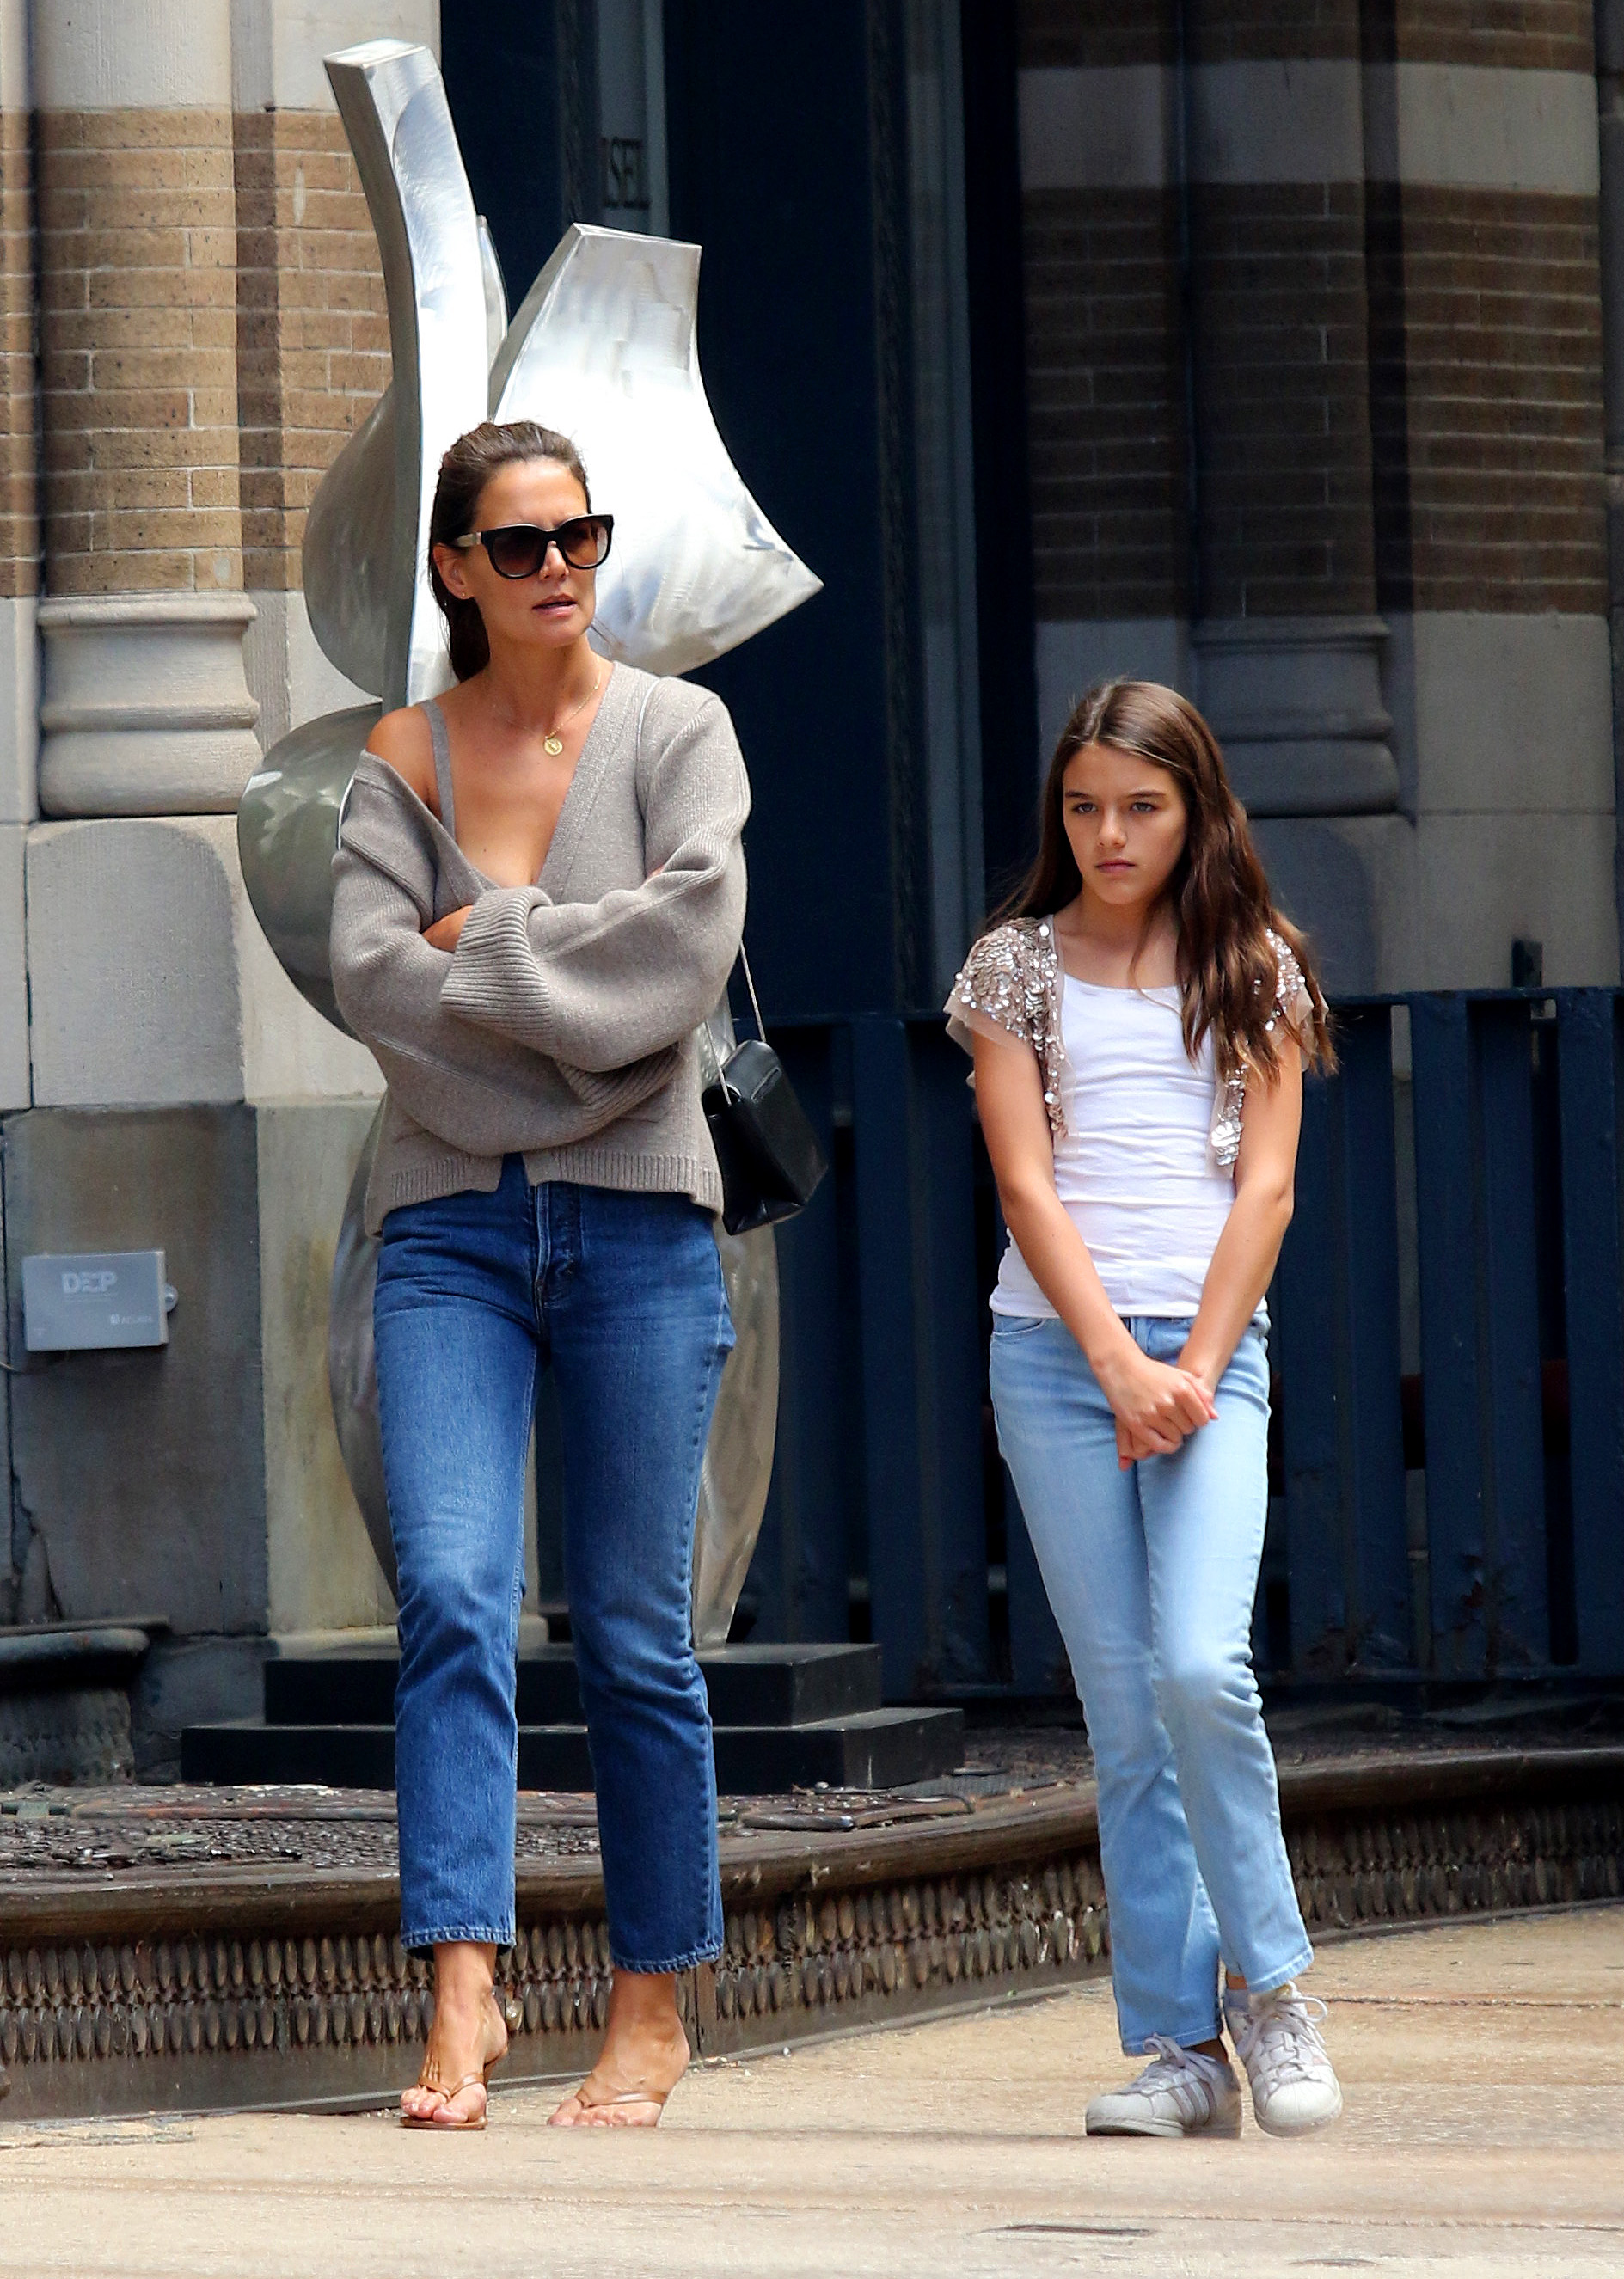 Katie Holmes and Daughter Suri Cruise Hail Cab in NYC Photos